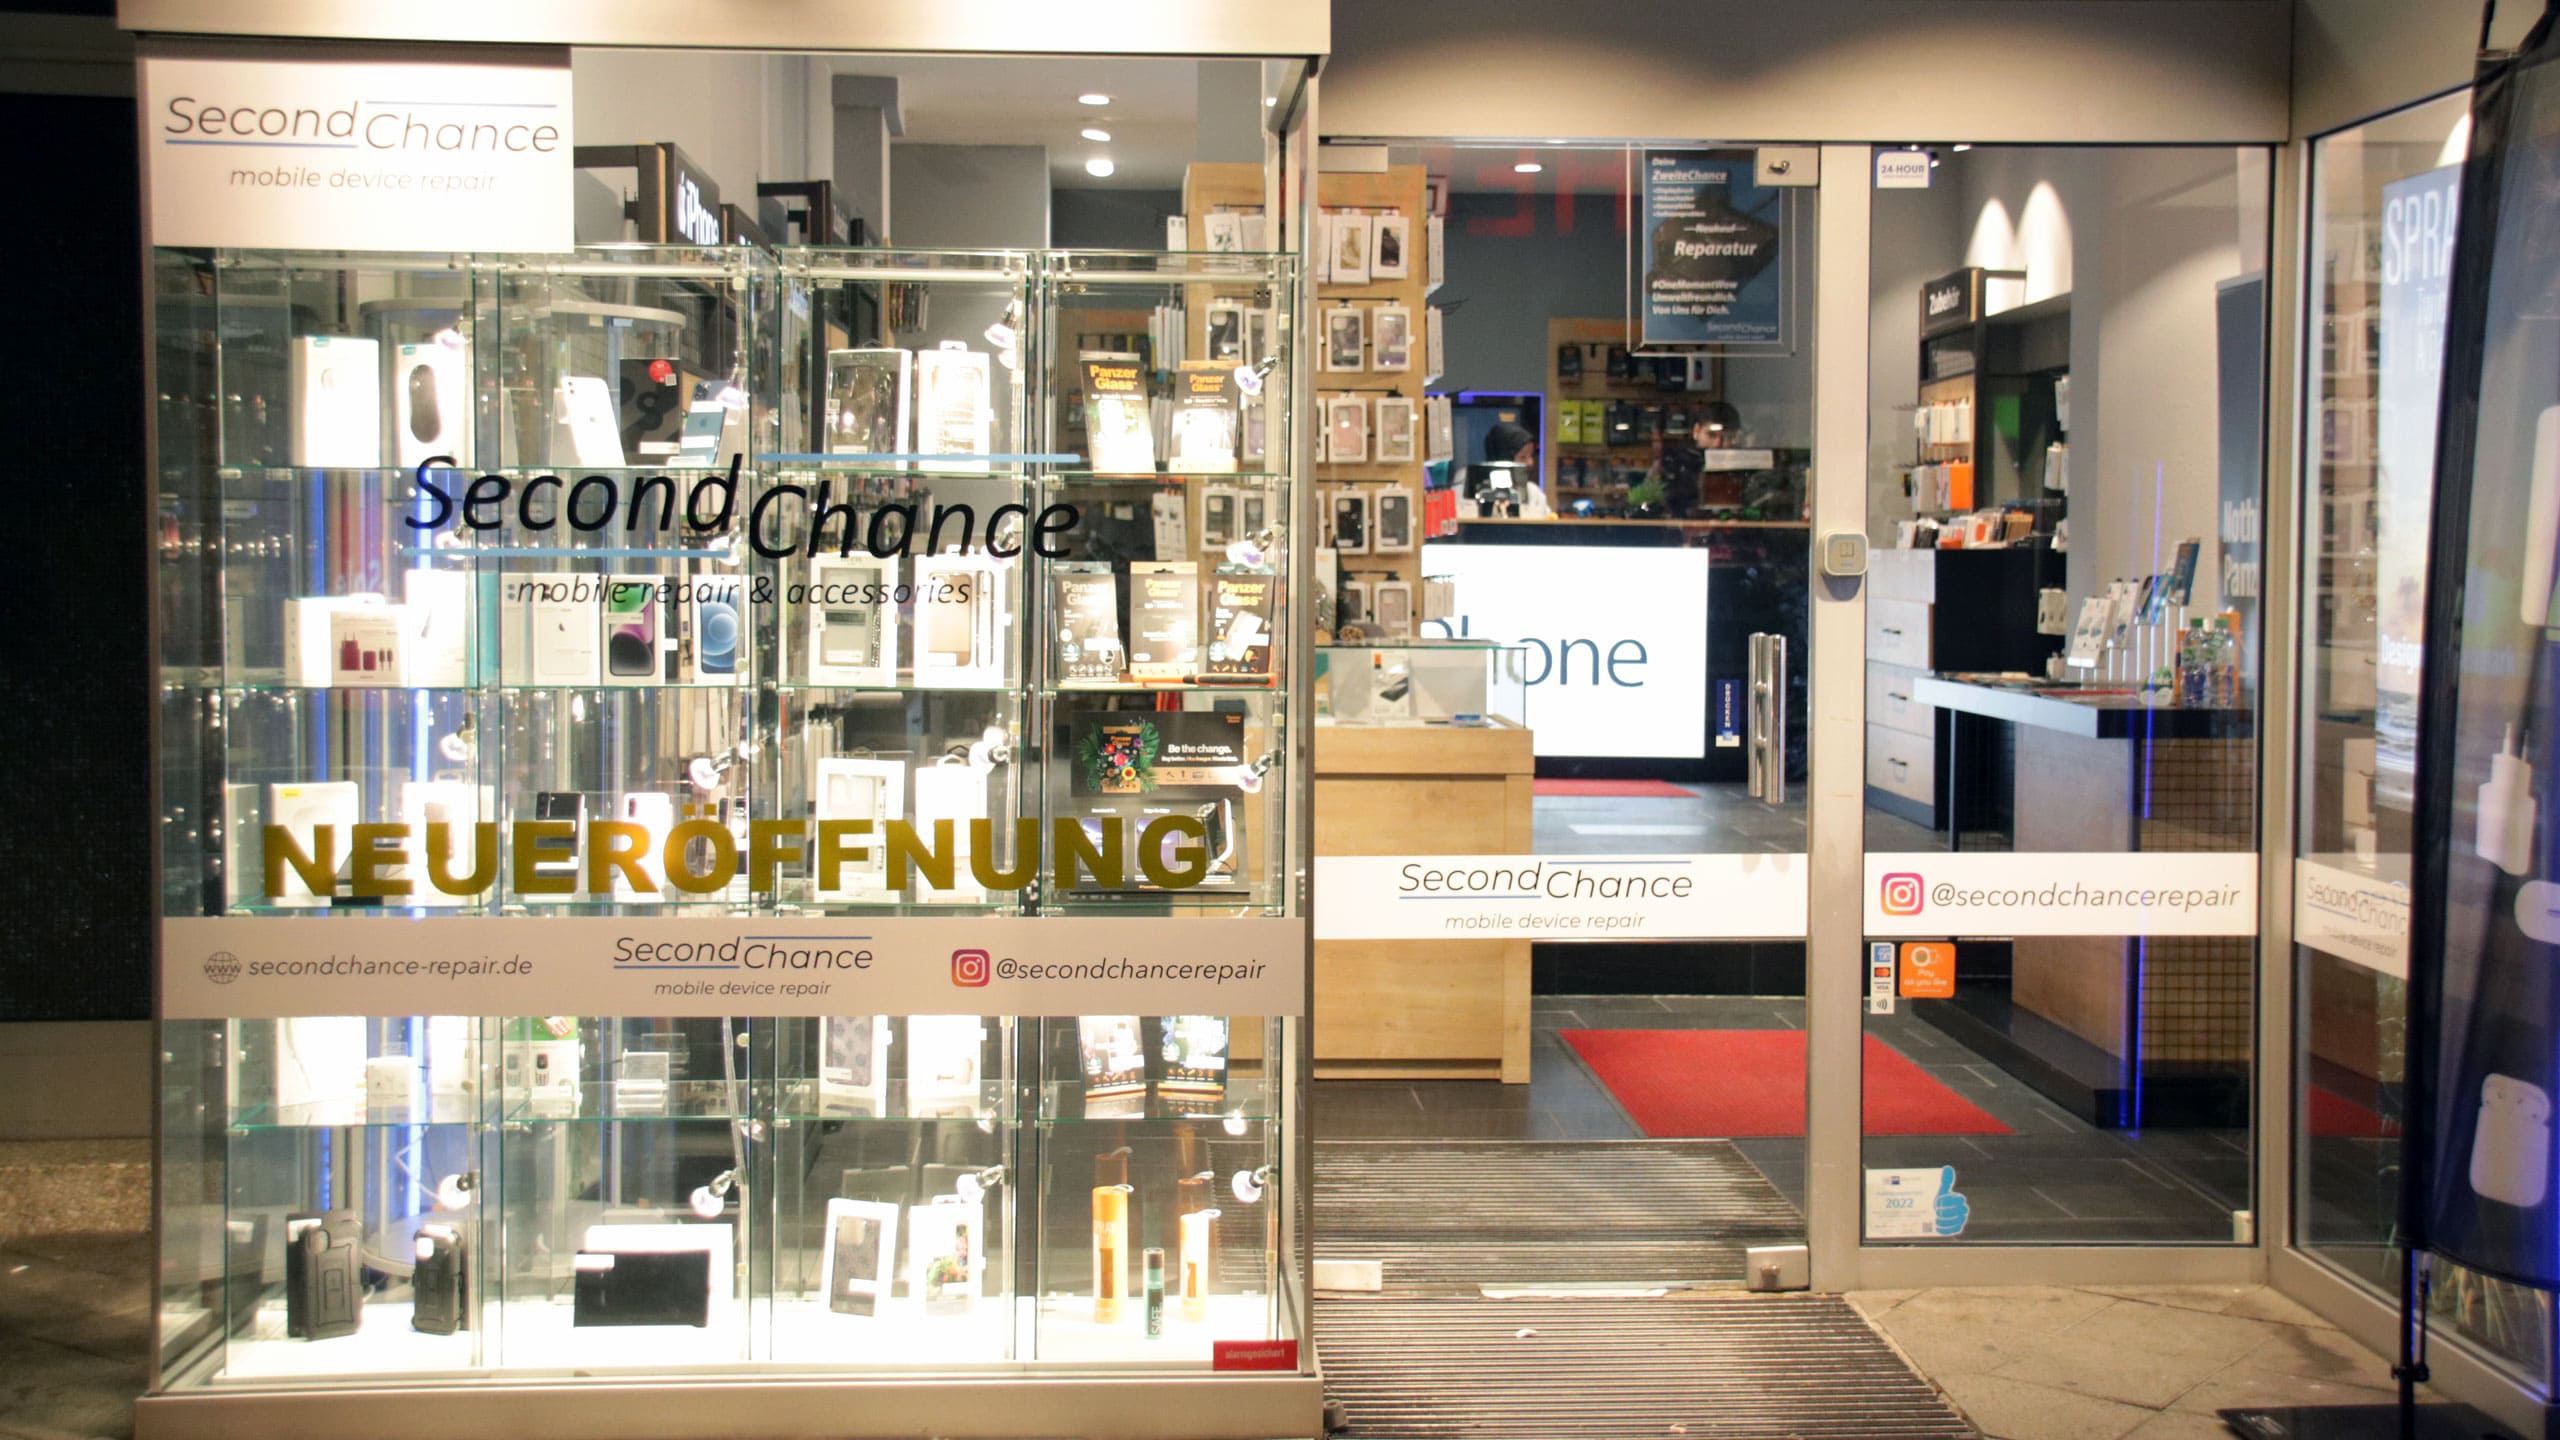 Second Chance mobile repair and accessories Store